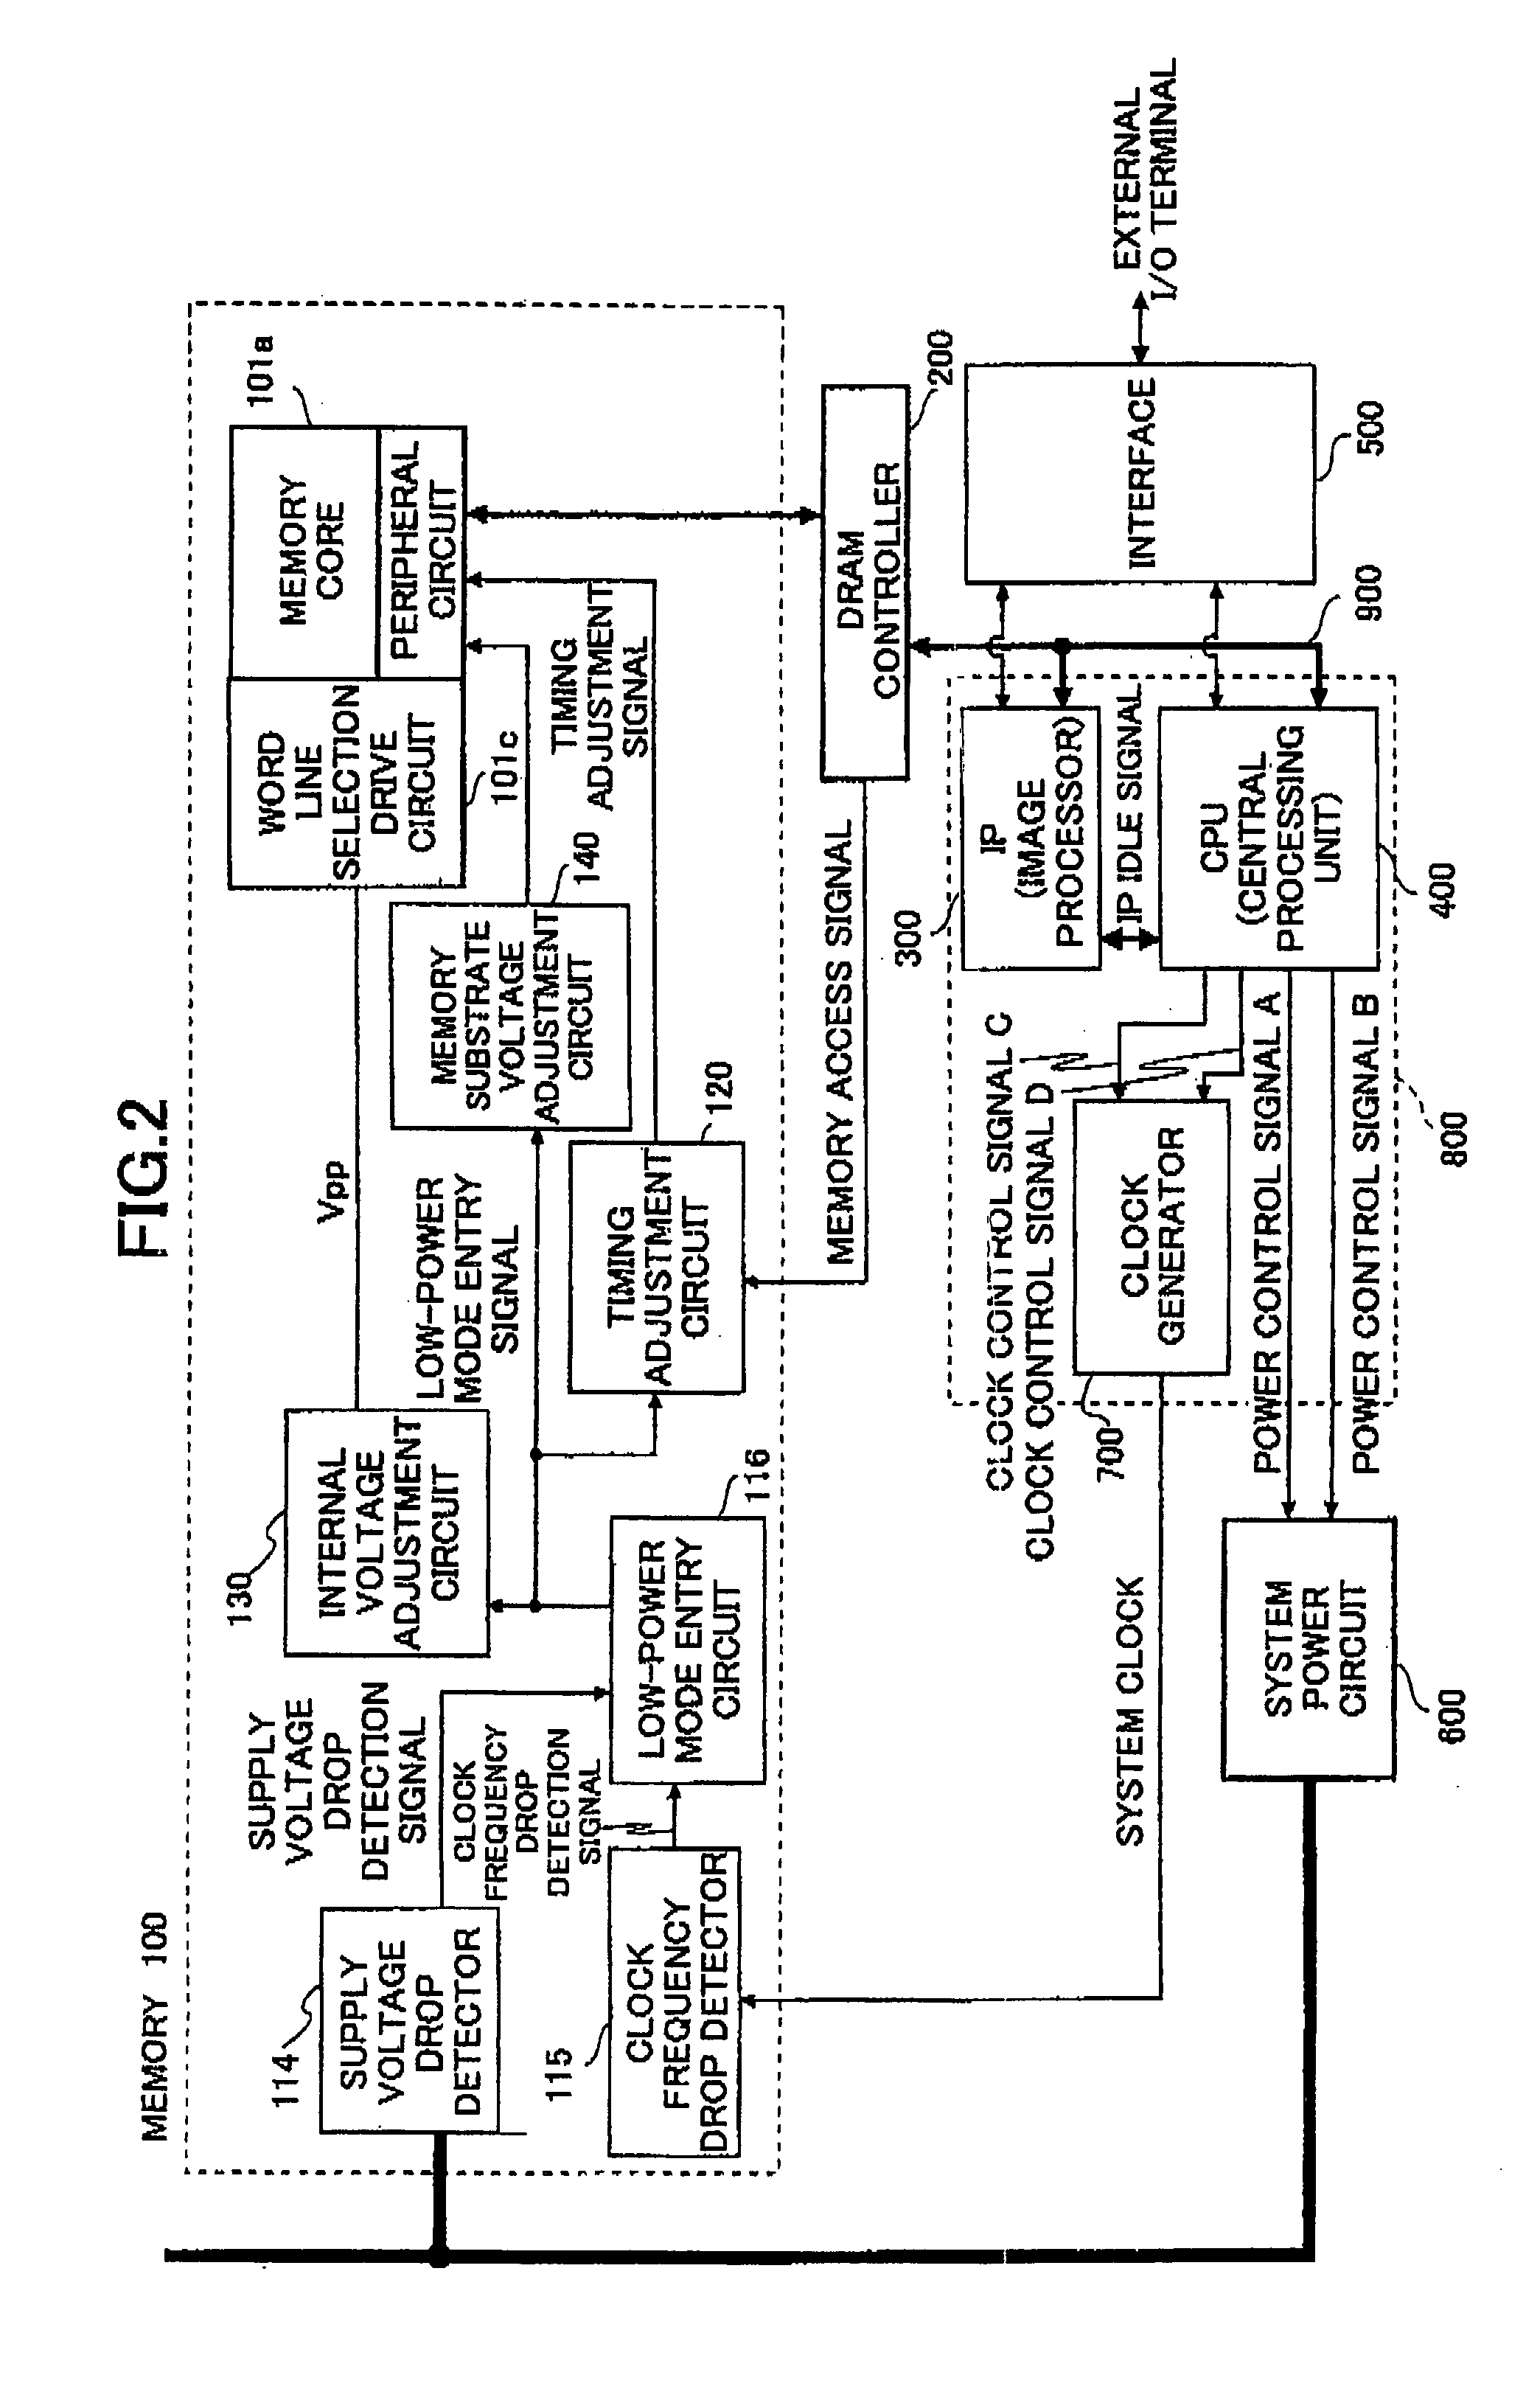 Apparatus to reduce the internal frequency of an integrated circuit by detecting a drop in the voltage and frequency